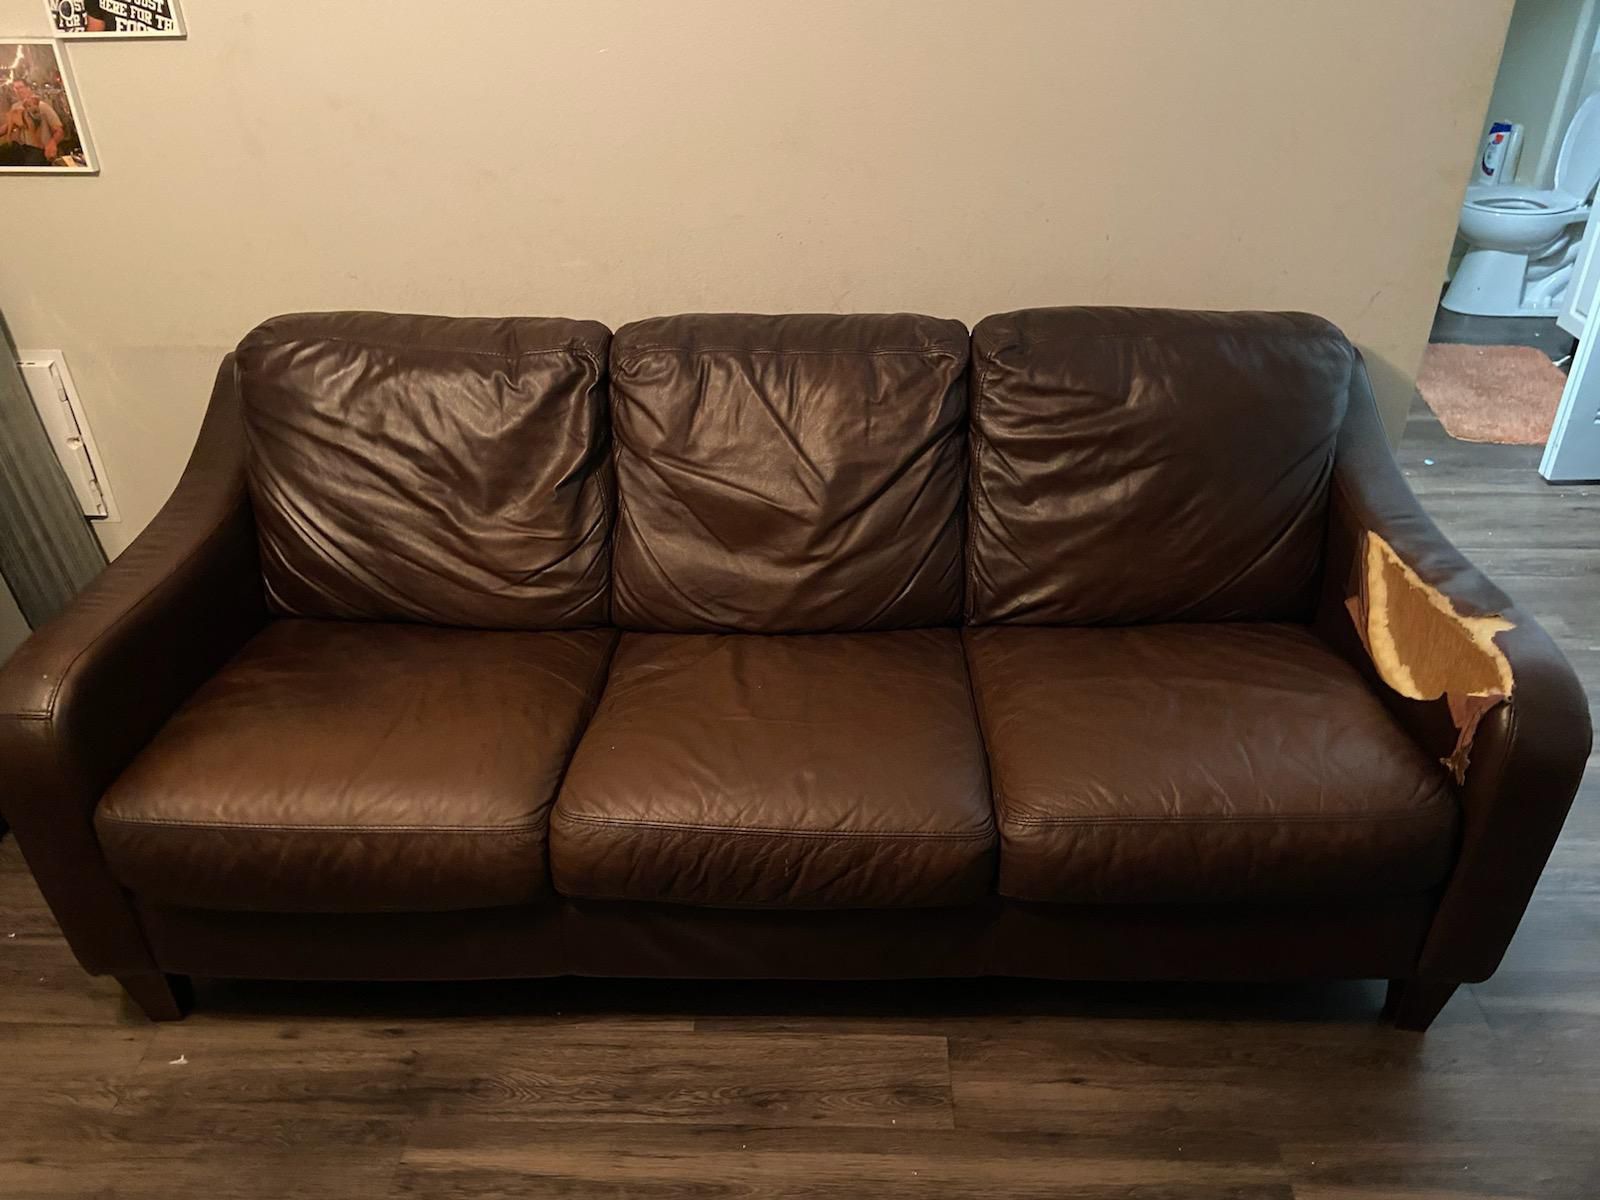 Free Entertainment Center Or Brown Leather Couch